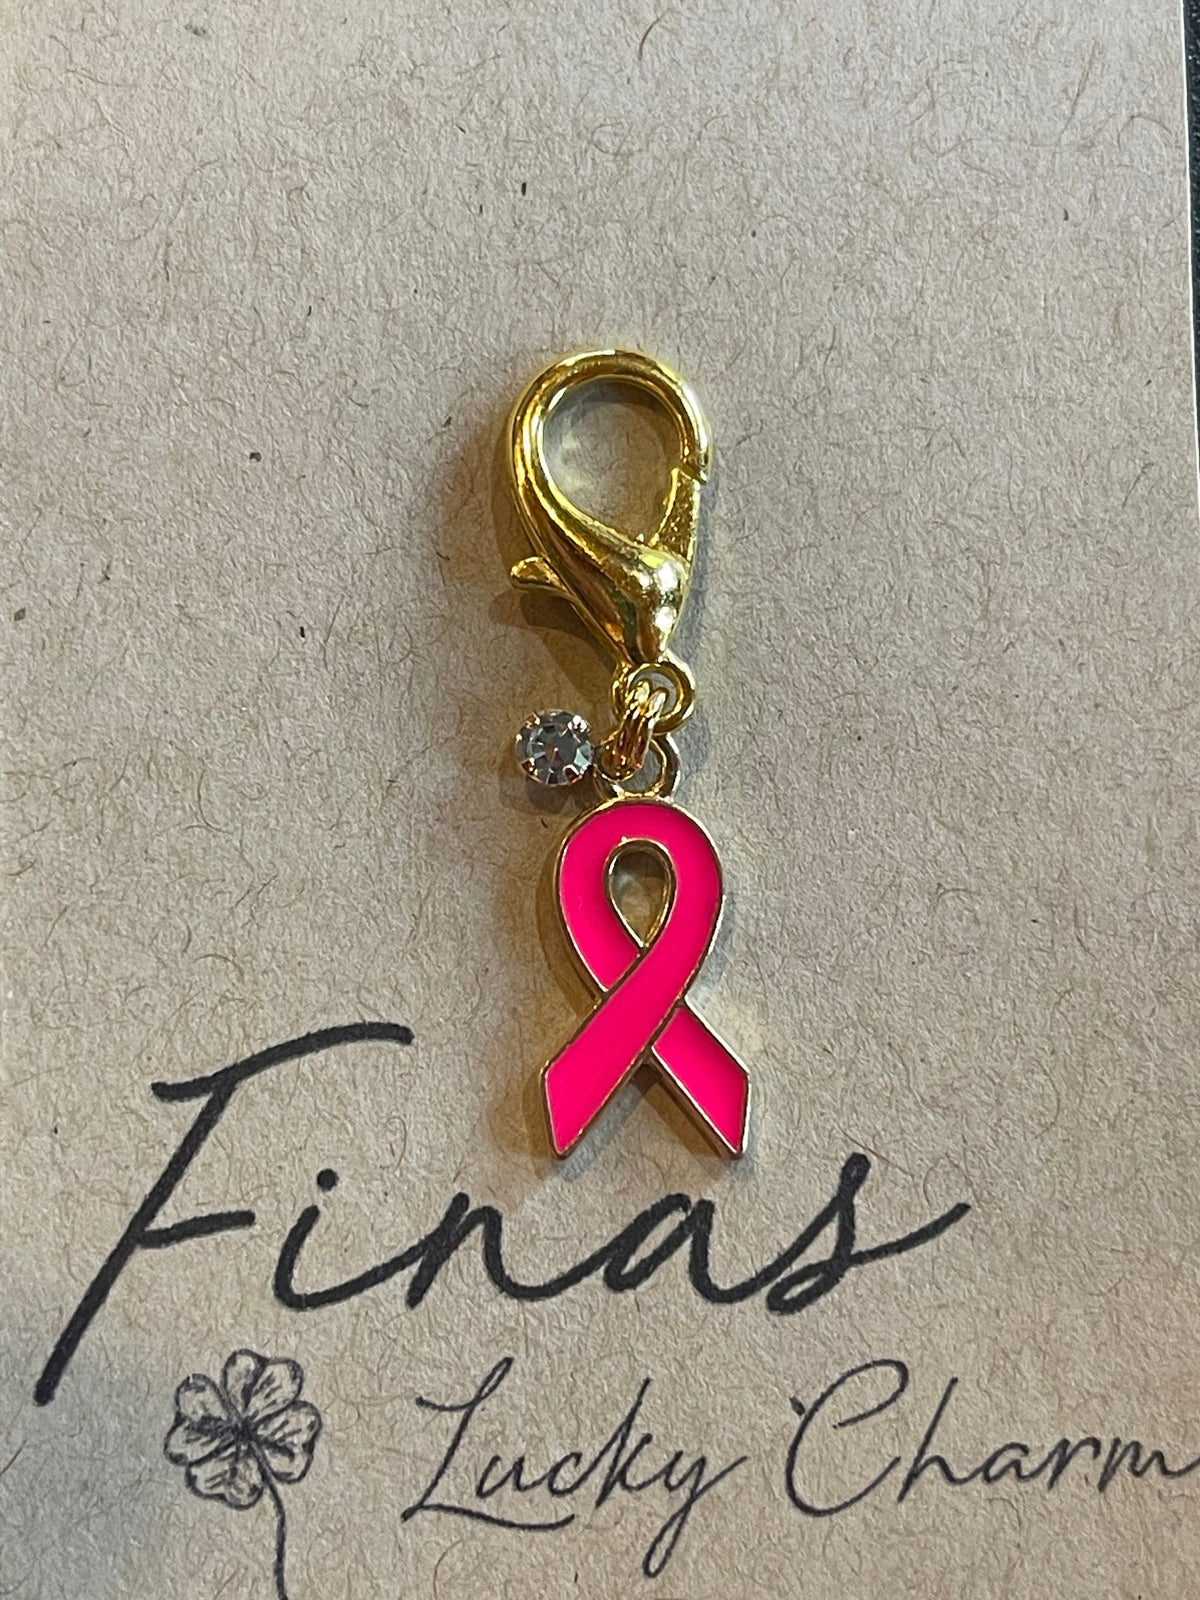 Fina's Lucky Charm charm Ribbon w/Diamond (Hot Pink) Fina's Lucky Charm equestrian team apparel online tack store mobile tack store custom farm apparel custom show stable clothing equestrian lifestyle horse show clothing riding clothes horses equestrian tack store